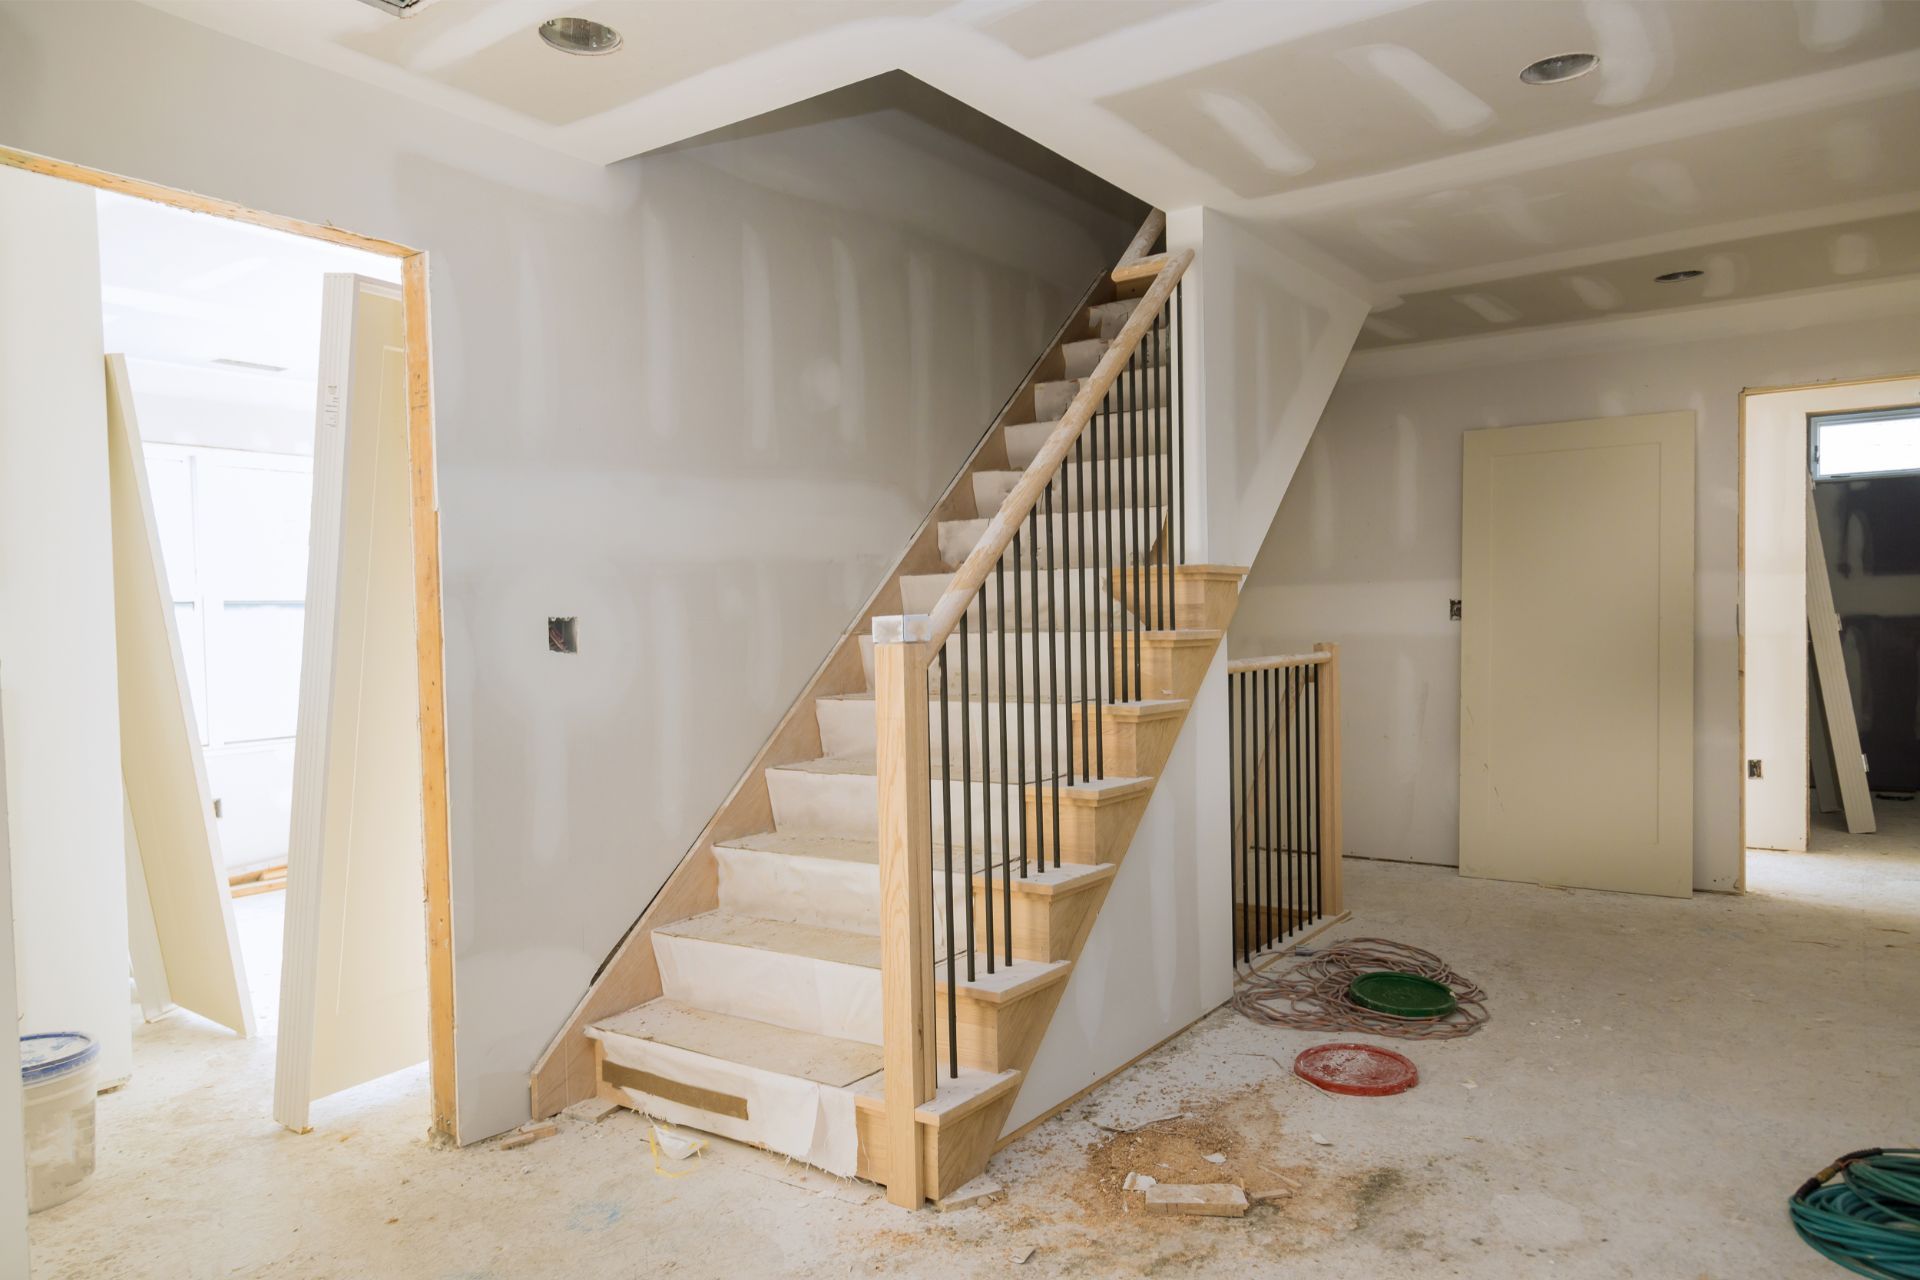 A work-in-progress interior of a home in Athens, GA, showing a wooden staircase with natural finish treads and white risers. Modern metal balusters line the stairway and matching landing railing. The surrounding walls and ceiling are freshly drywalled, primed for painting. Construction materials and tools are scattered around the floor, indicating ongoing renovations. Natural light from a window illuminates the space, highlighting the staircase as the focal point in this phase of home improvement.